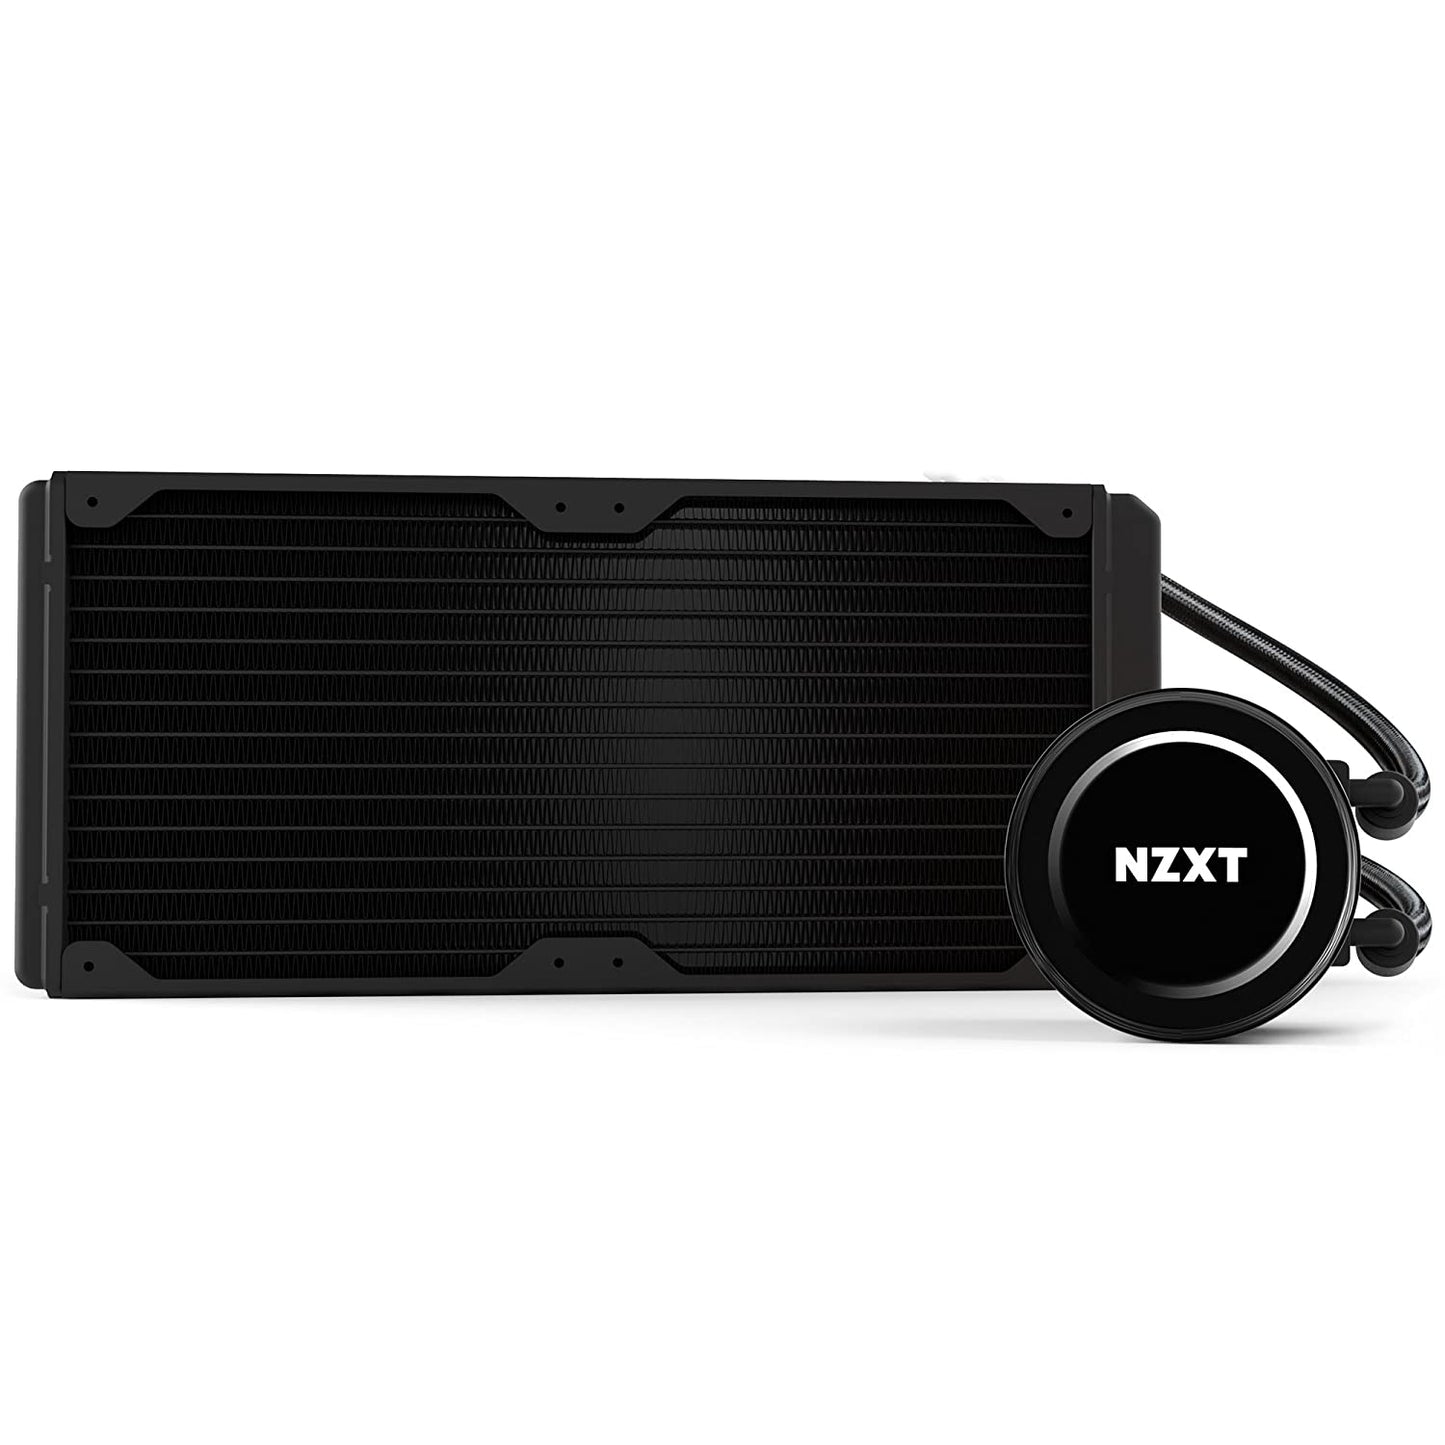 NZXT Kraken X62 280mm AIO Liquid Cooler with RGB and AER P Radiator Fan